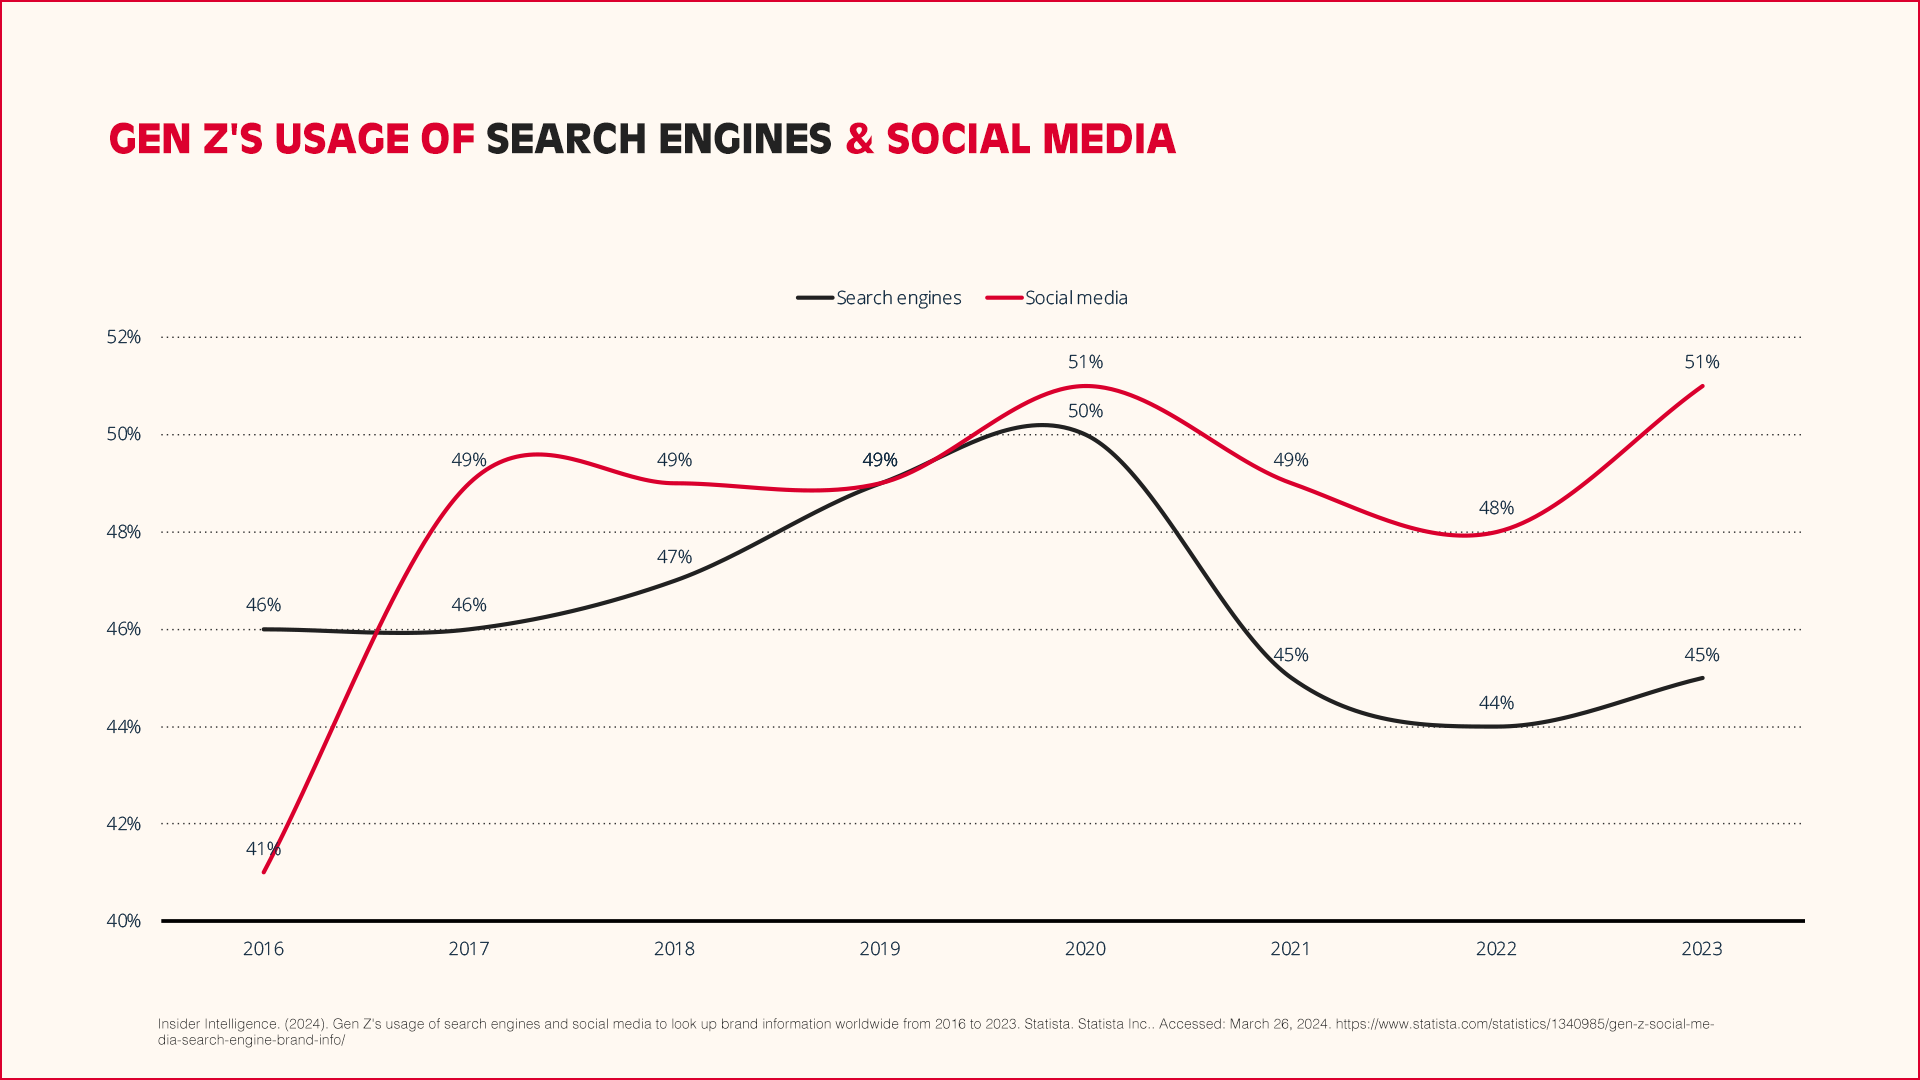 Gen Z's usage of search engines & social media